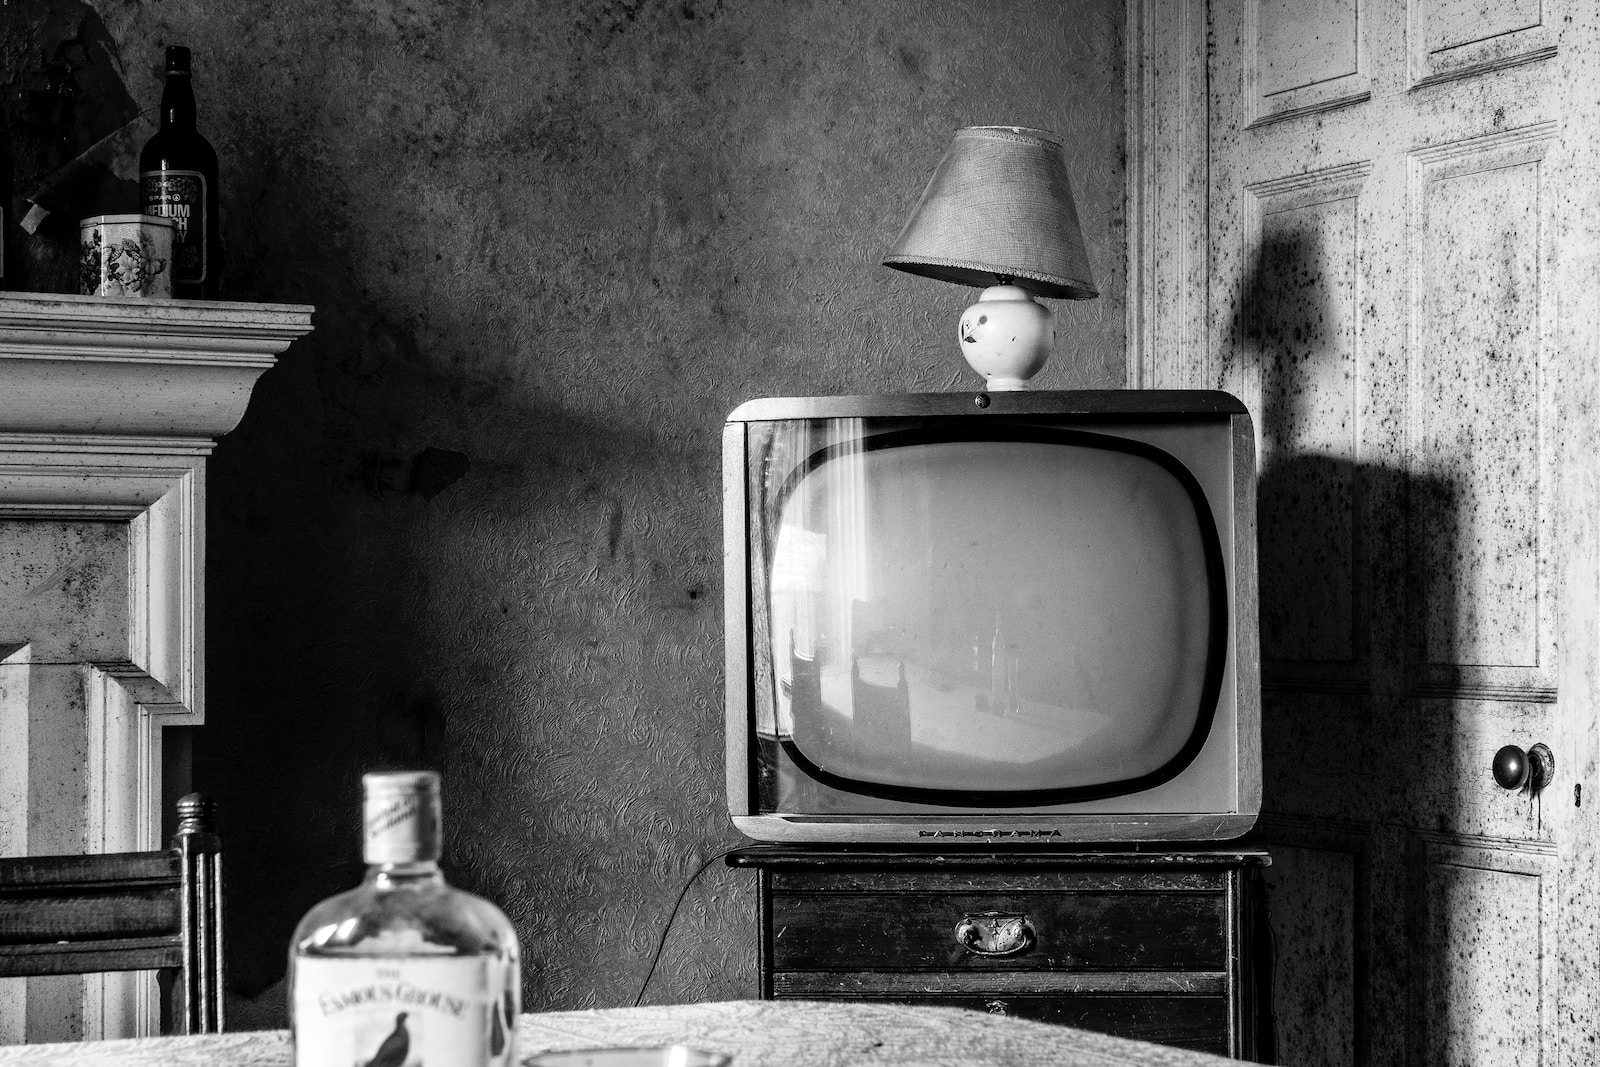 bottle of liquor on table with CRT television across beside the close door